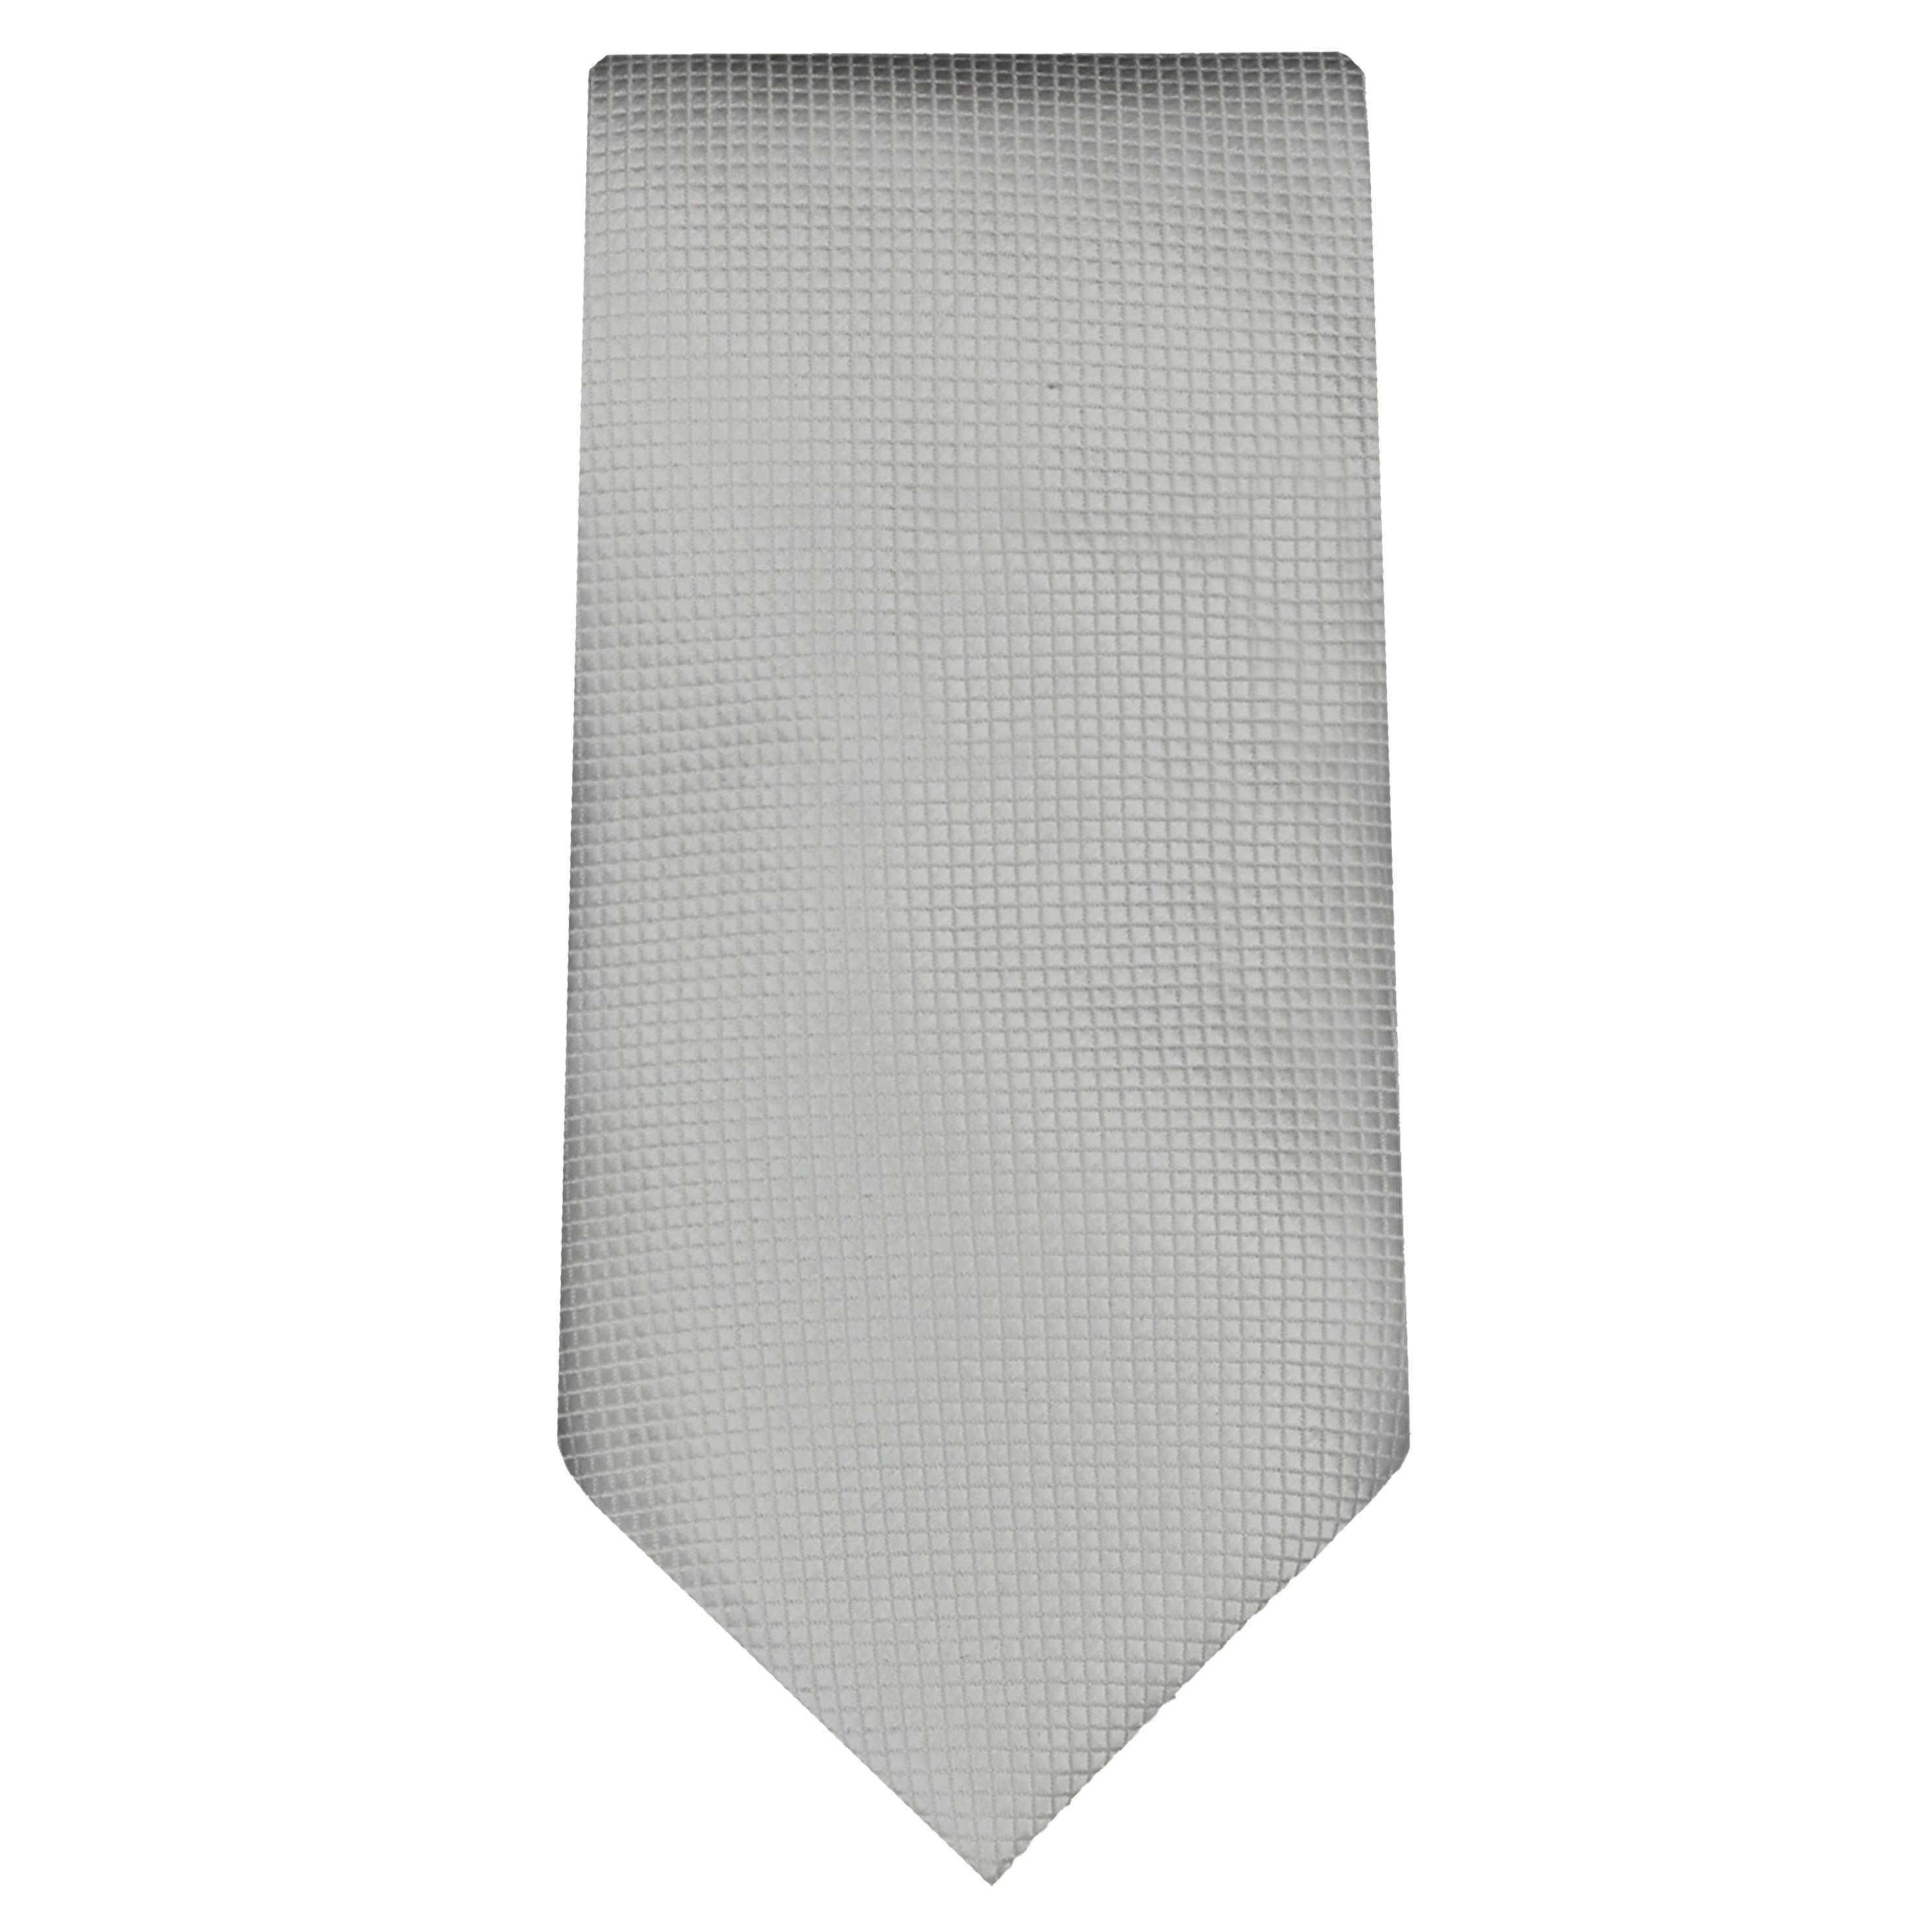 PLAIN WHITE TIE WITH GRIDS